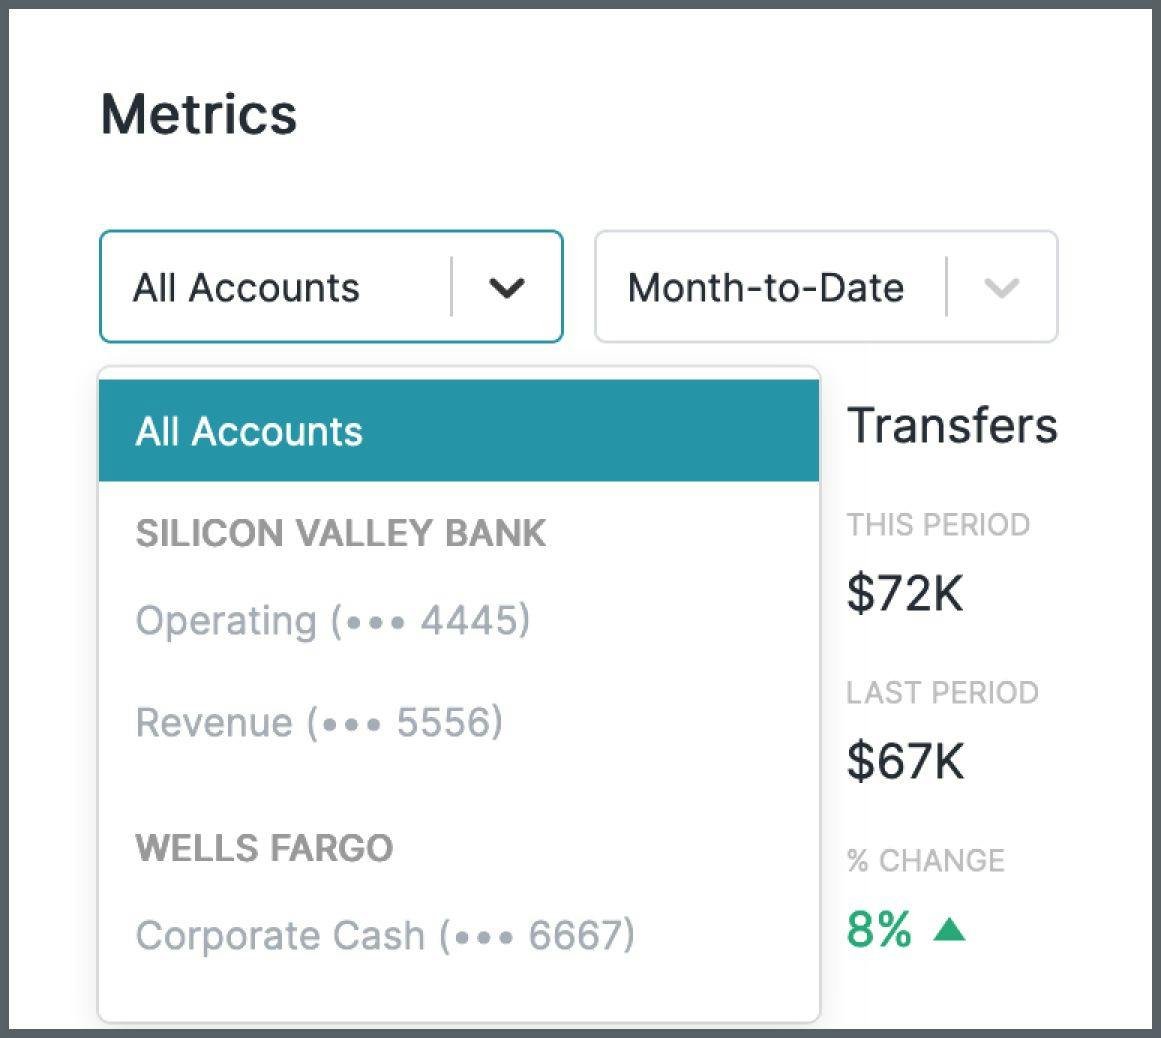 Metrics filtered by account